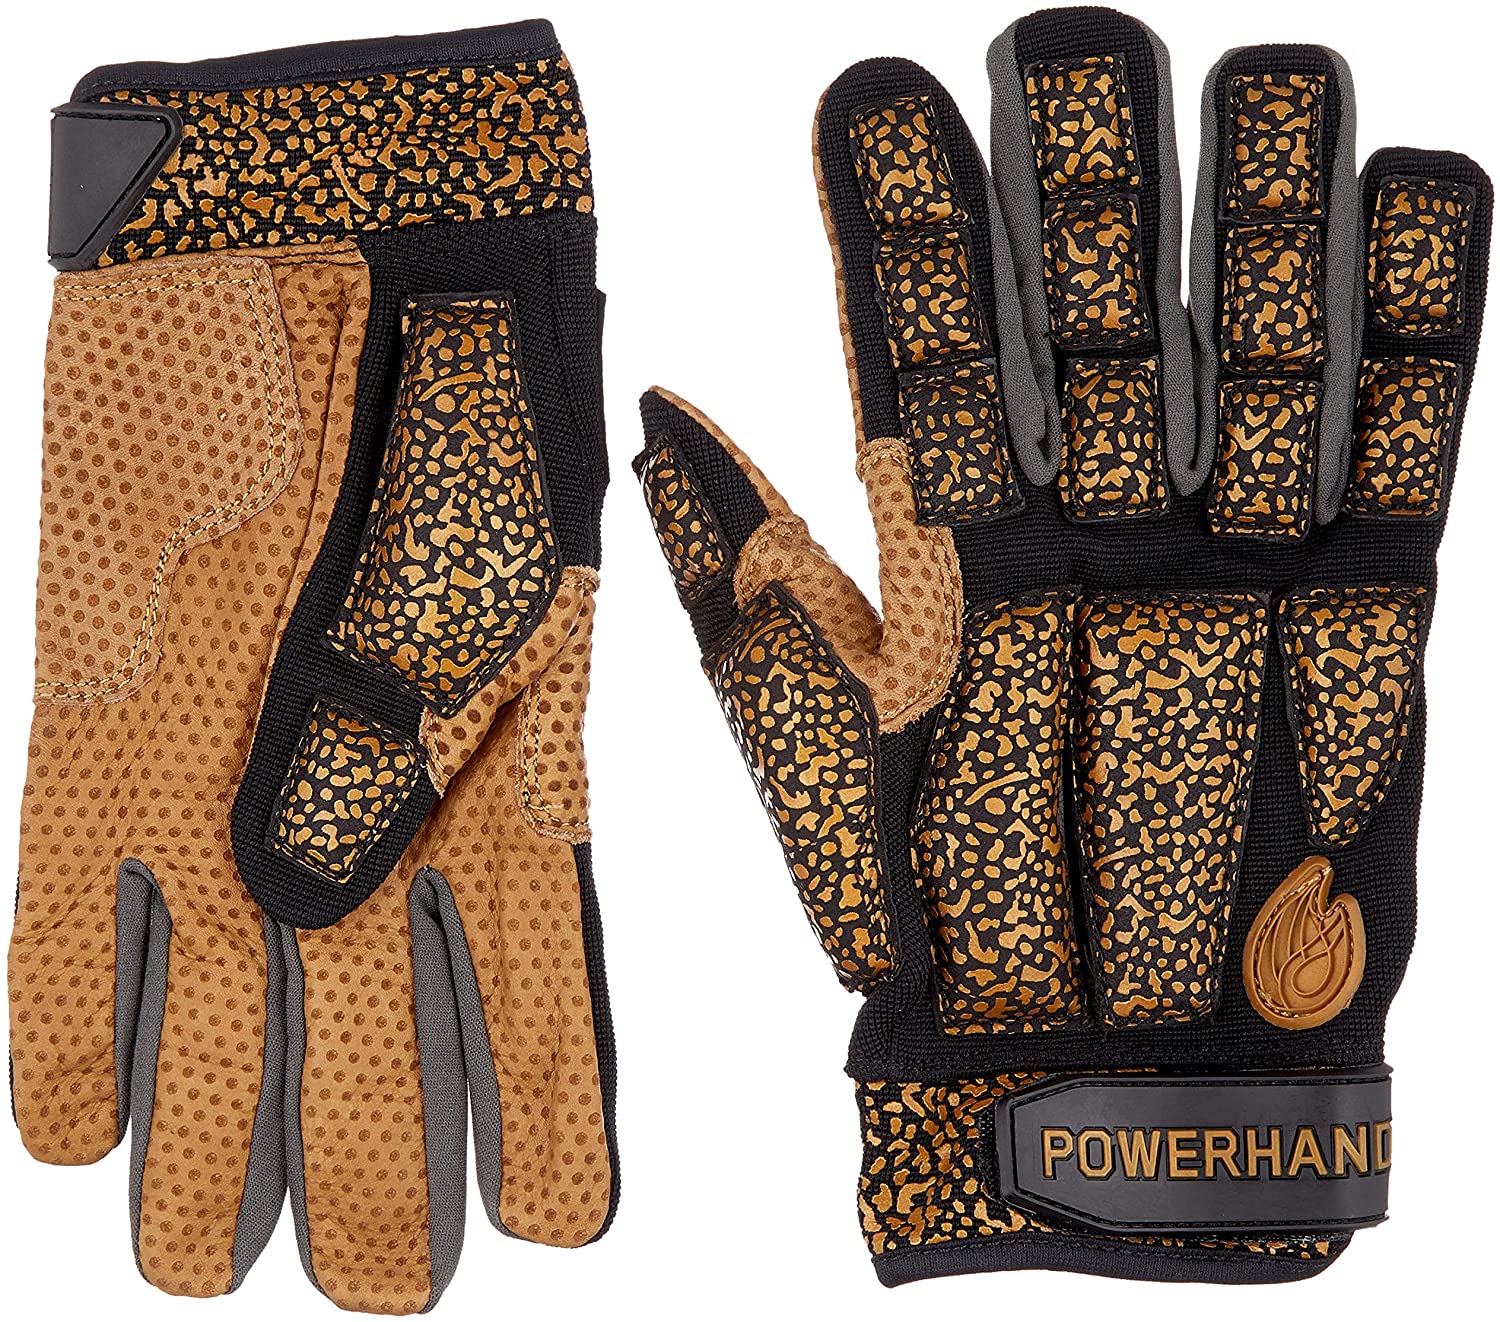 POWERHANDZ Weighted Baseball & Softball Gloves for Strength and Resistance Training